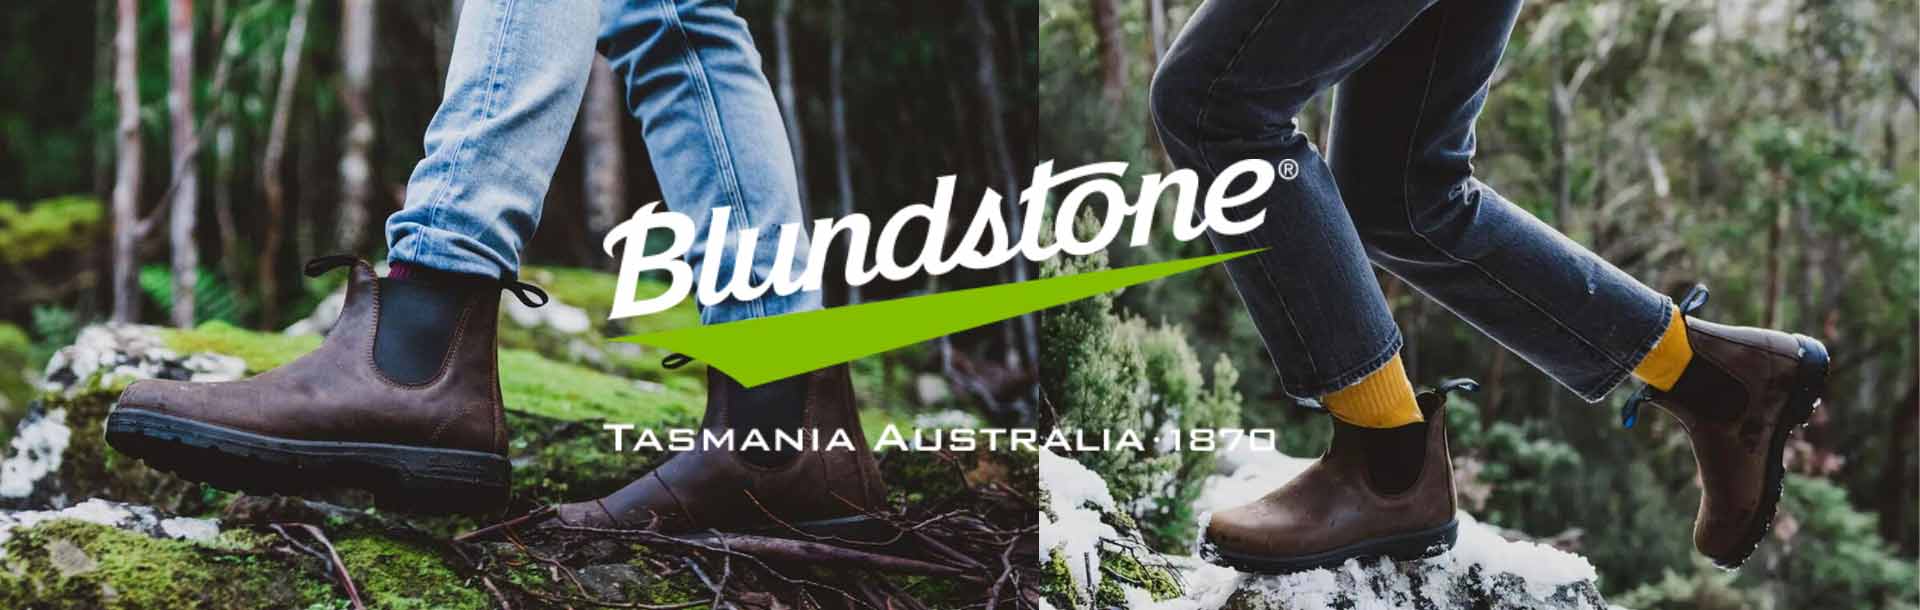 Why should you buy  Blundstone boots?